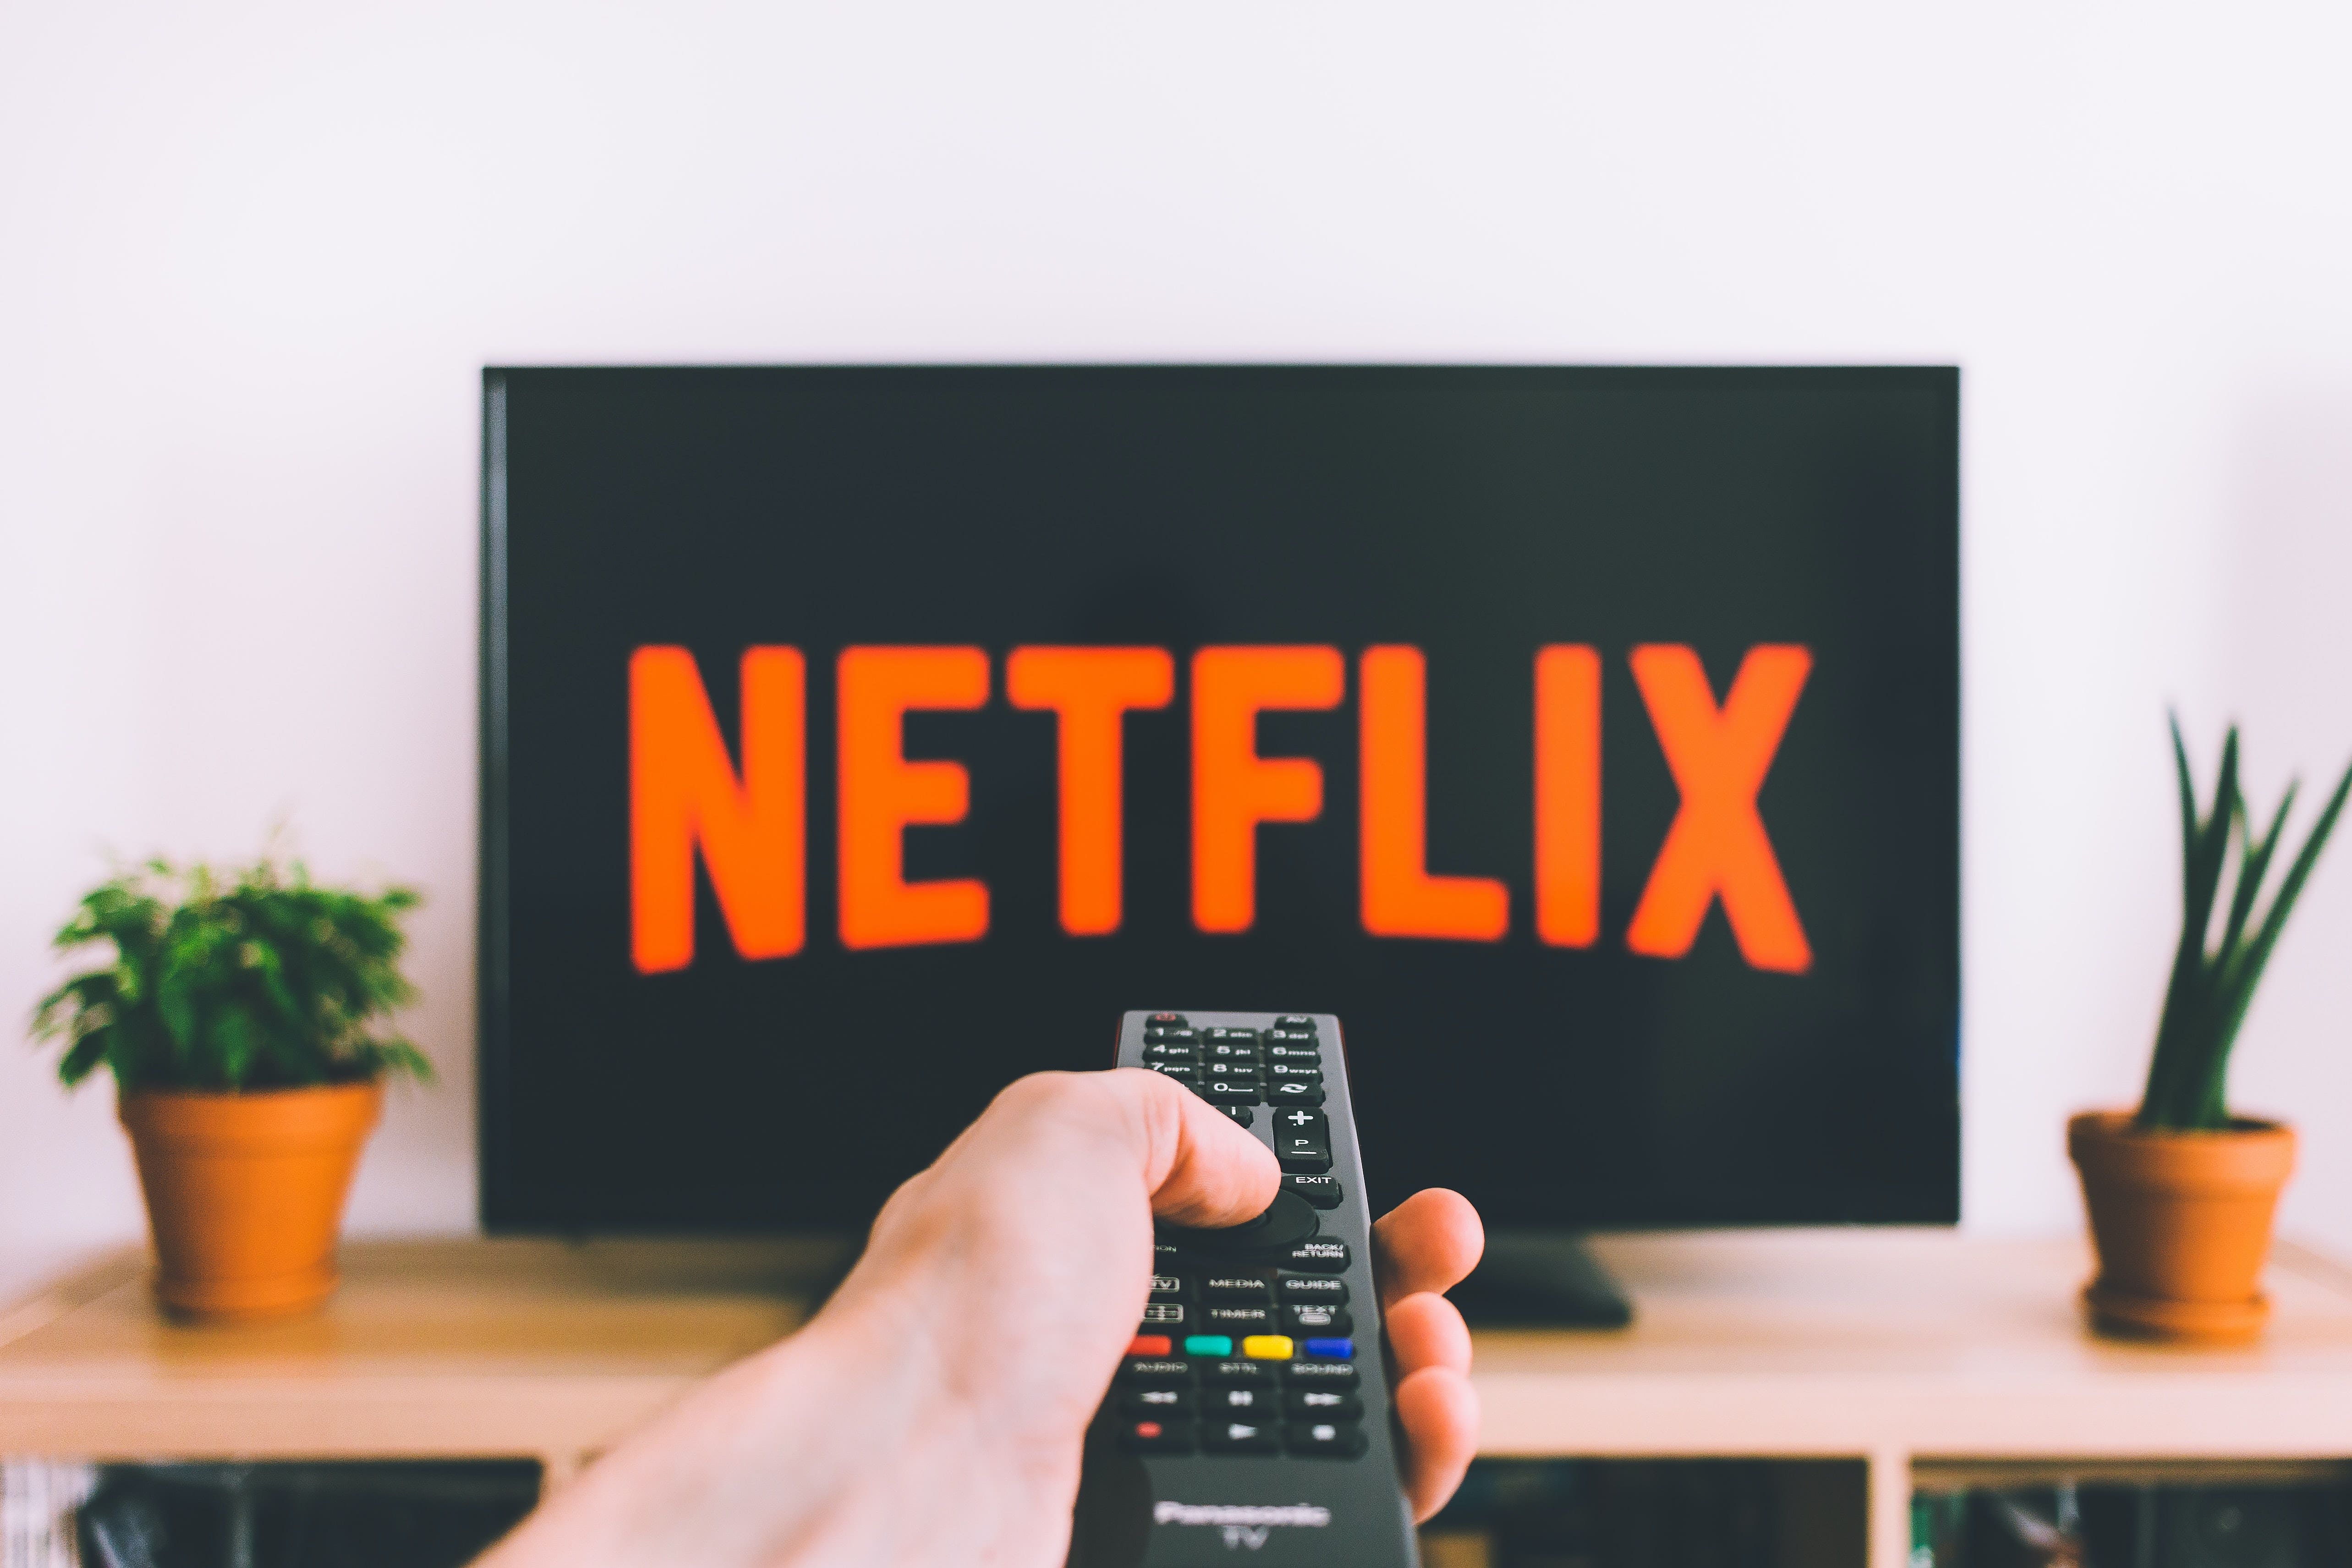 Netflix Analysts Are Raising Price Targets After Q4 Beat, Even The Ones With Sell And Neutral Ratings: Here's Why